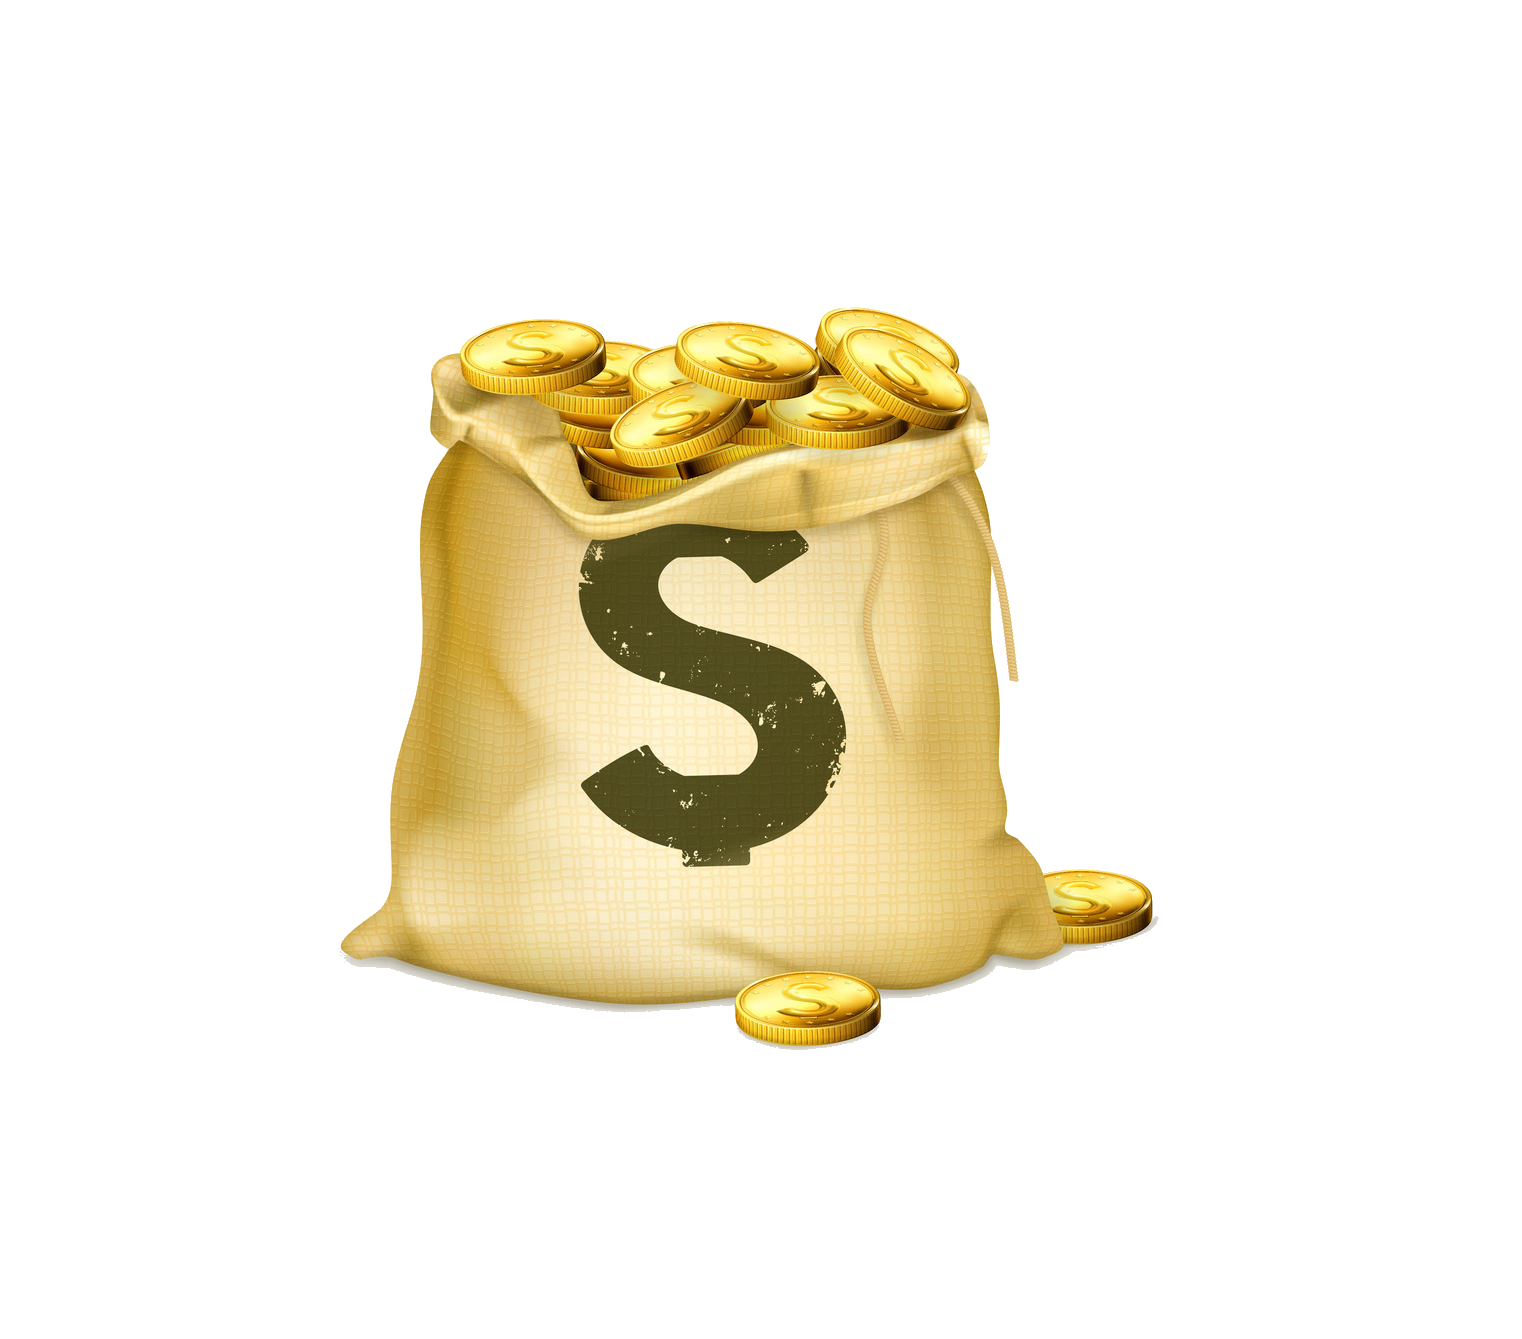 Download Bag Coin Coins Gold Of Free Png Hq Hq Png Image Freepngimg